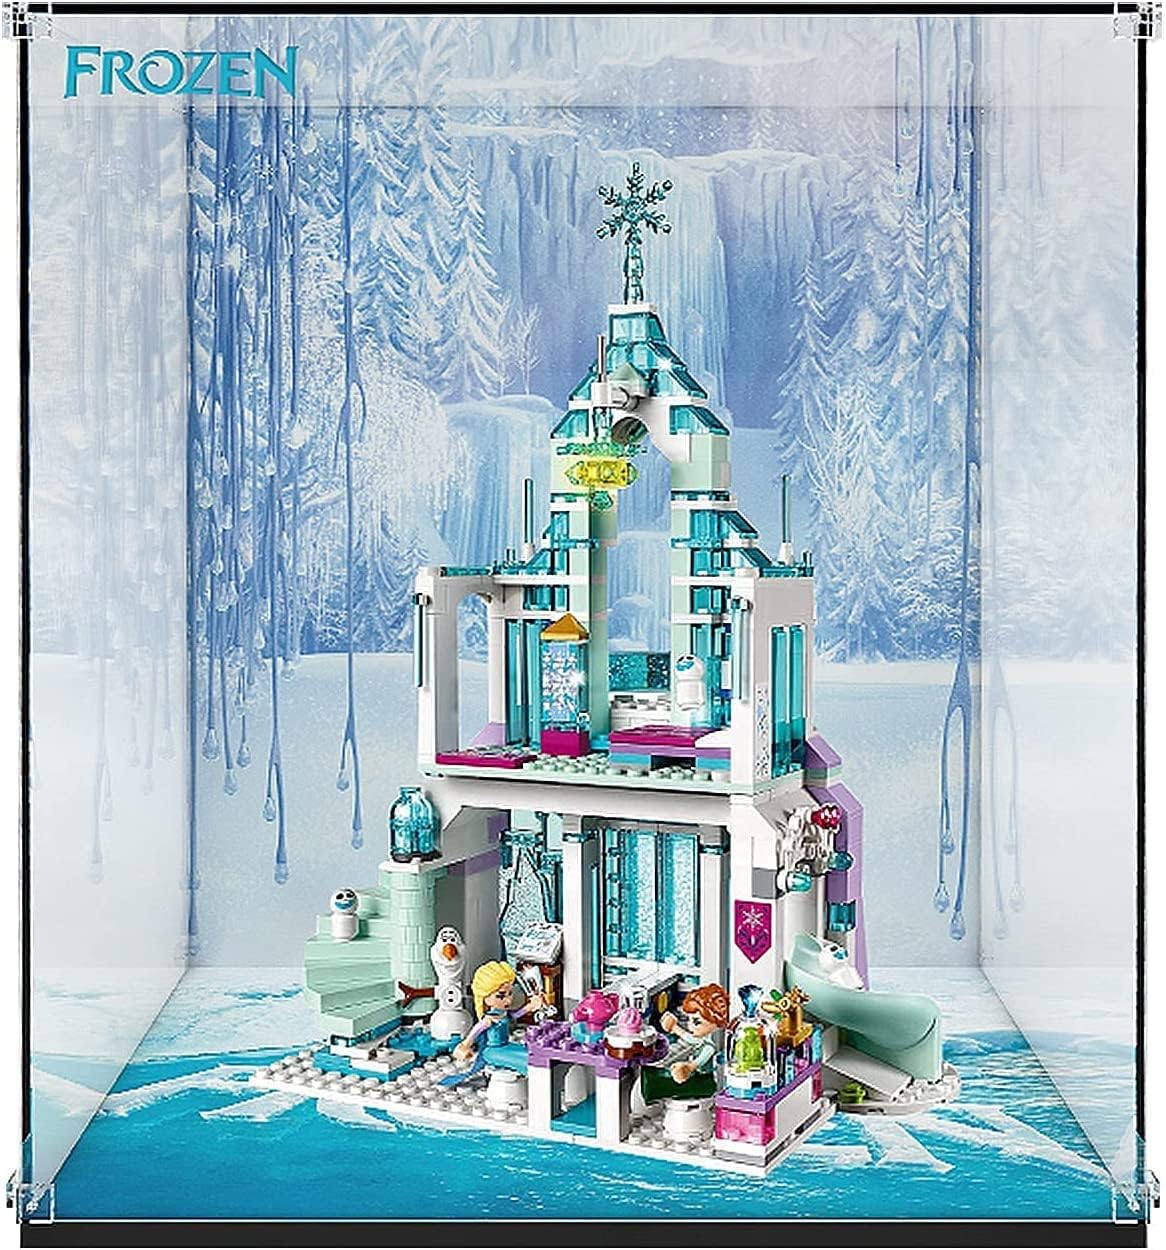 Acrylic Display Case for Lego 41148 Disney Princess Elsa's Magical Ice Palace Model Set, 3MM Assemble Cube Collectibles Box,Transparent Display Gifts Box for Lego Lover-Model NOT Included